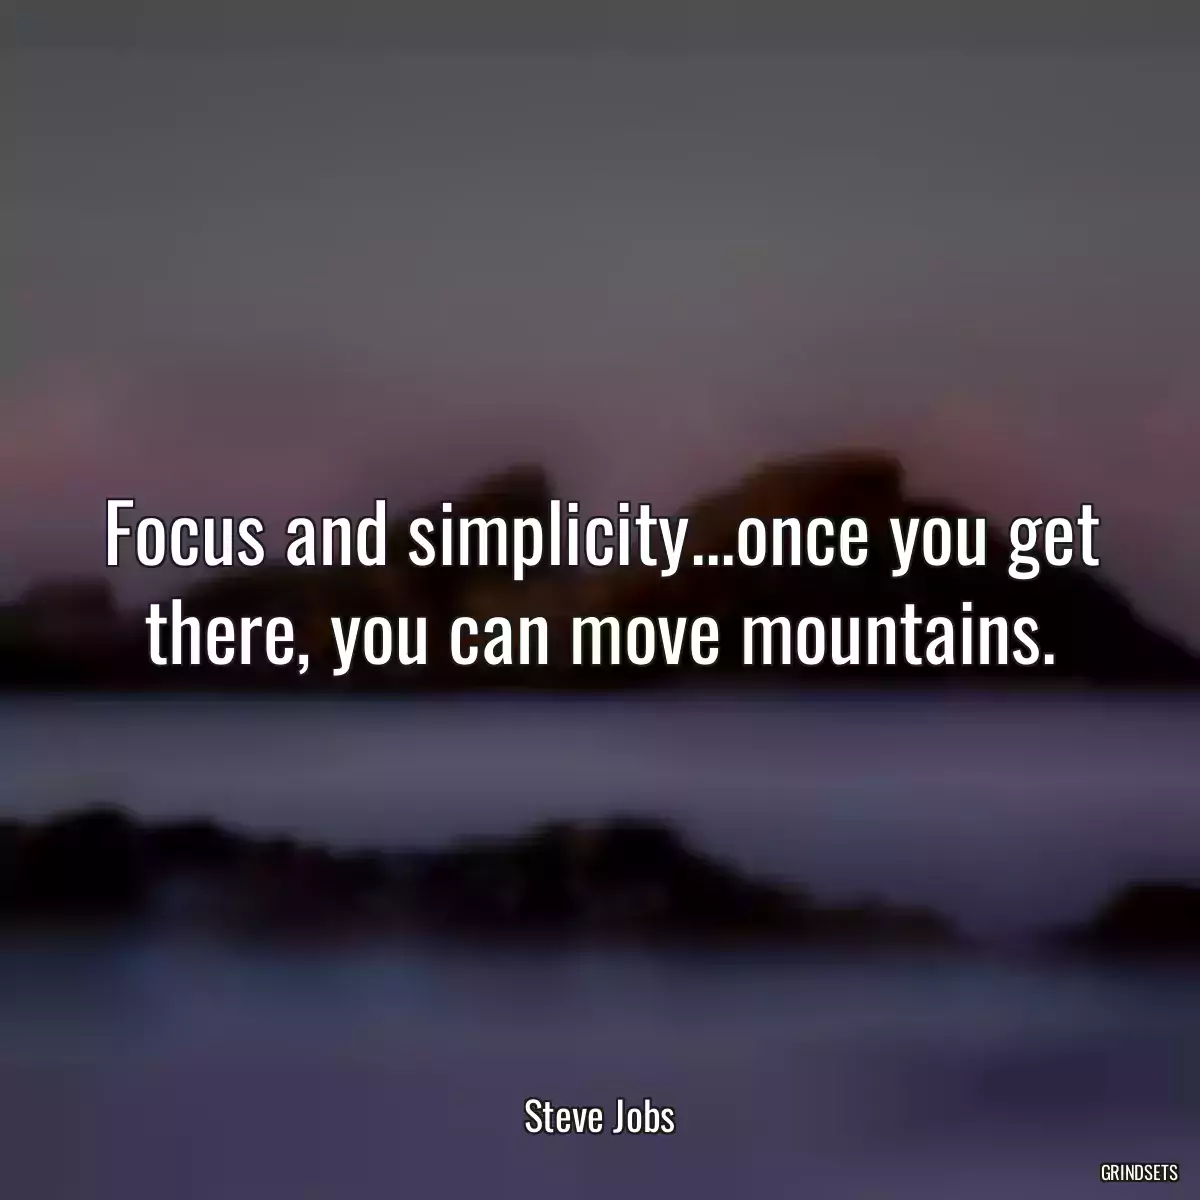 Focus and simplicity...once you get there, you can move mountains.